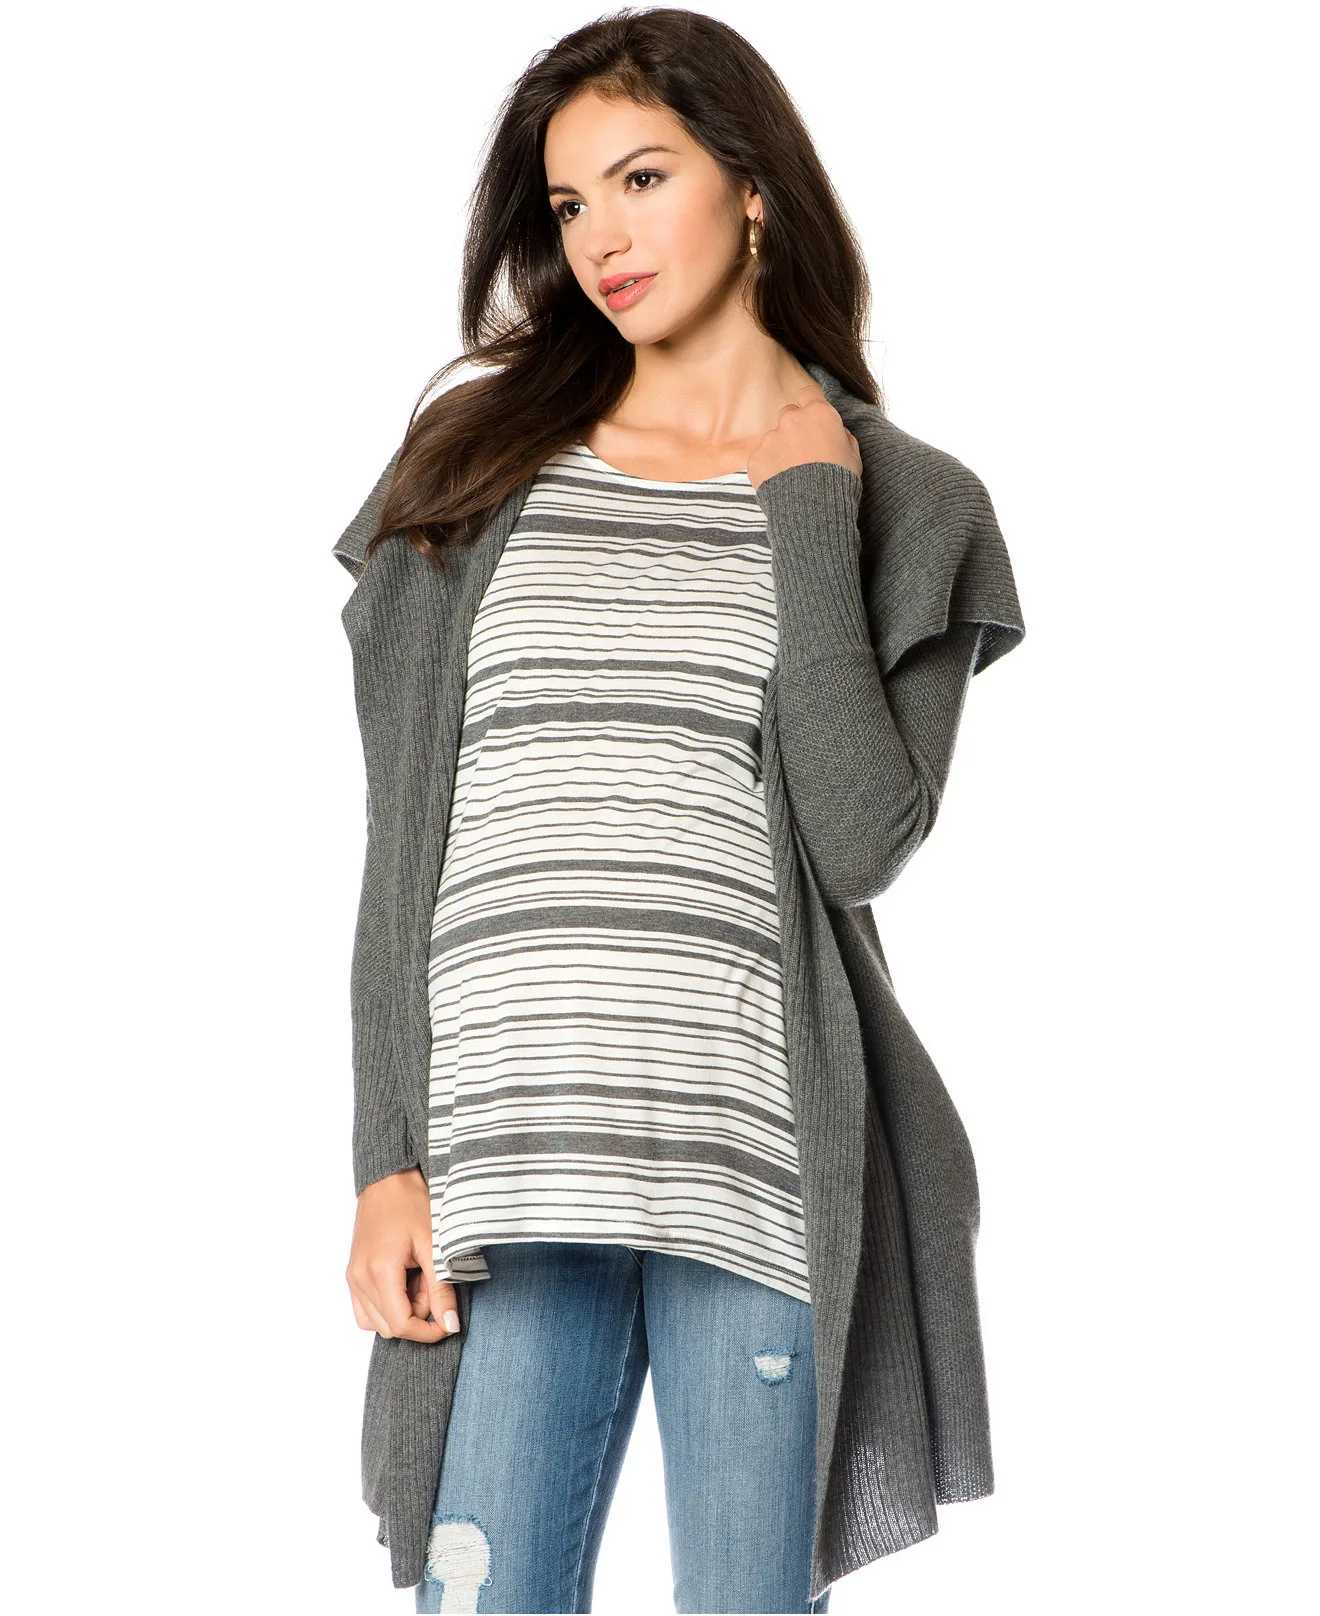 Hooded Cashmere Cardigan Coat from Macys